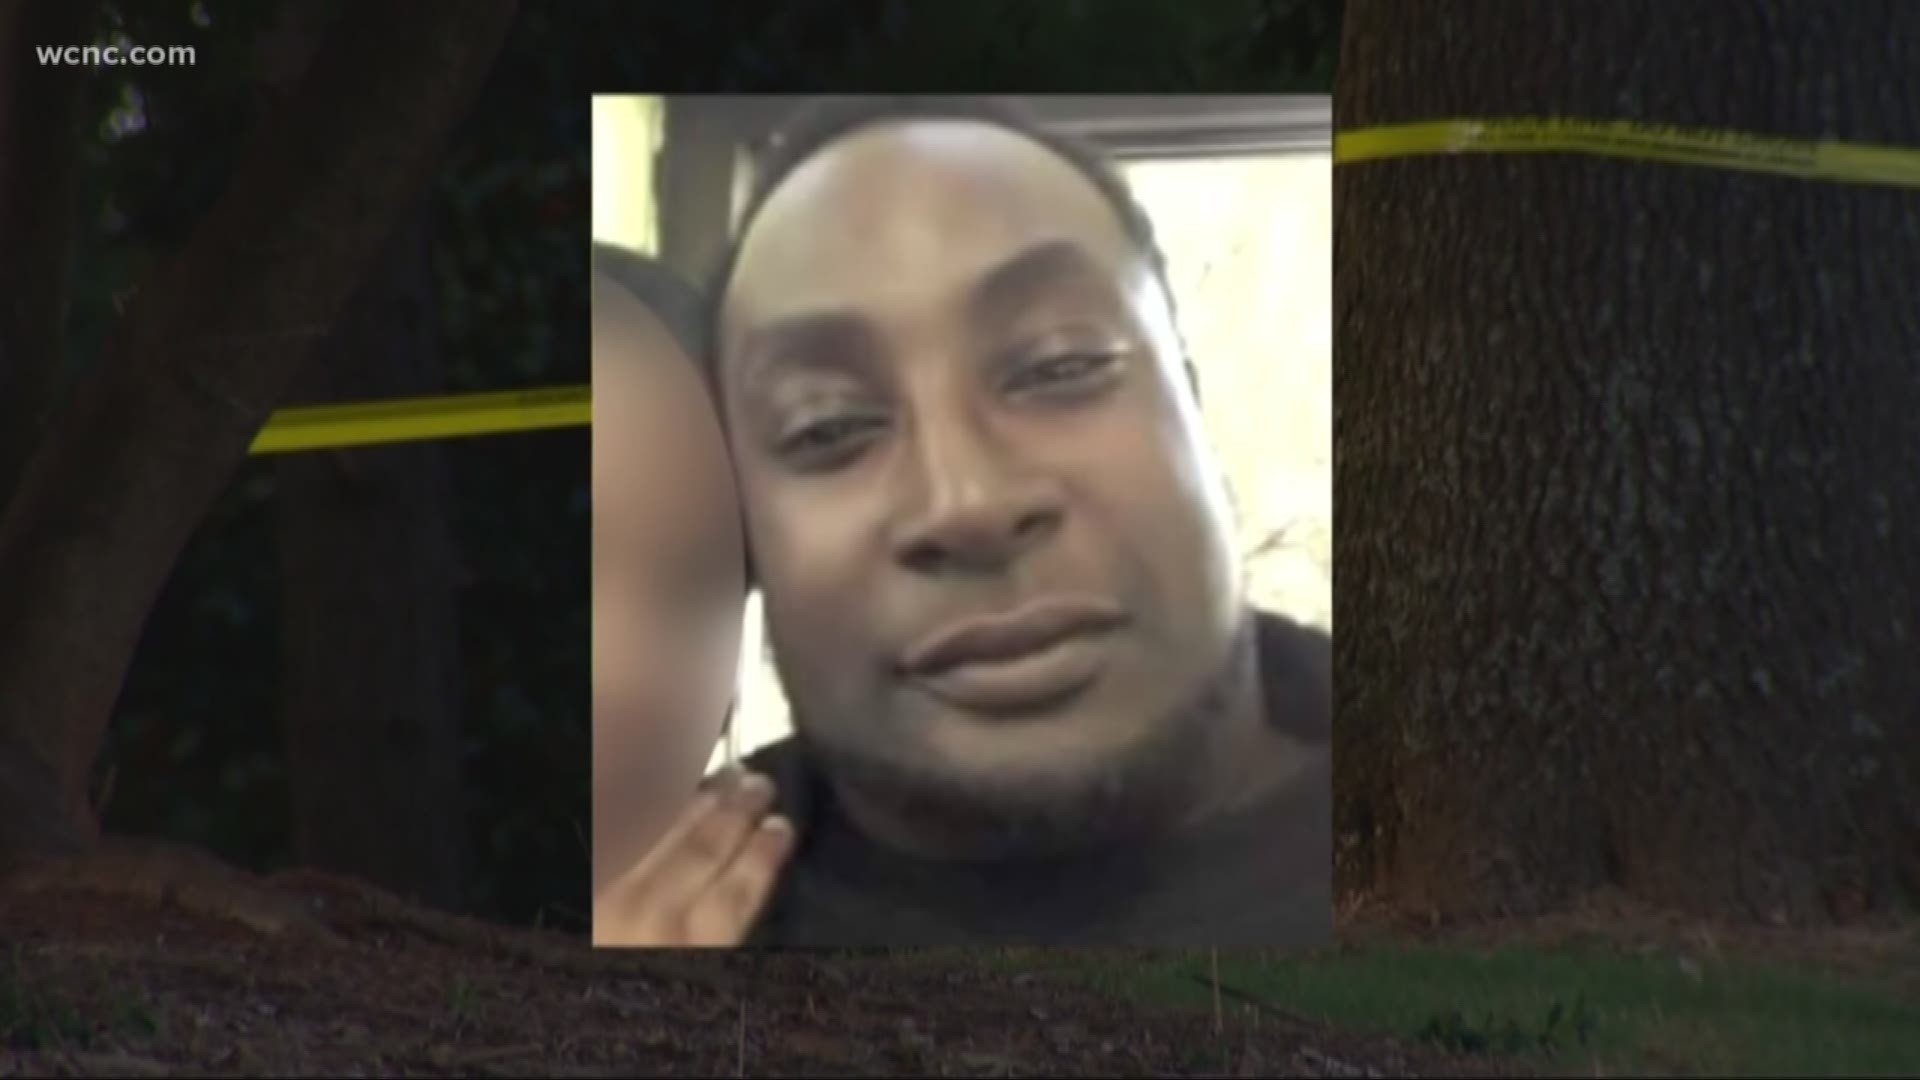 Family of Keith Scott files lawsuit against CMPD